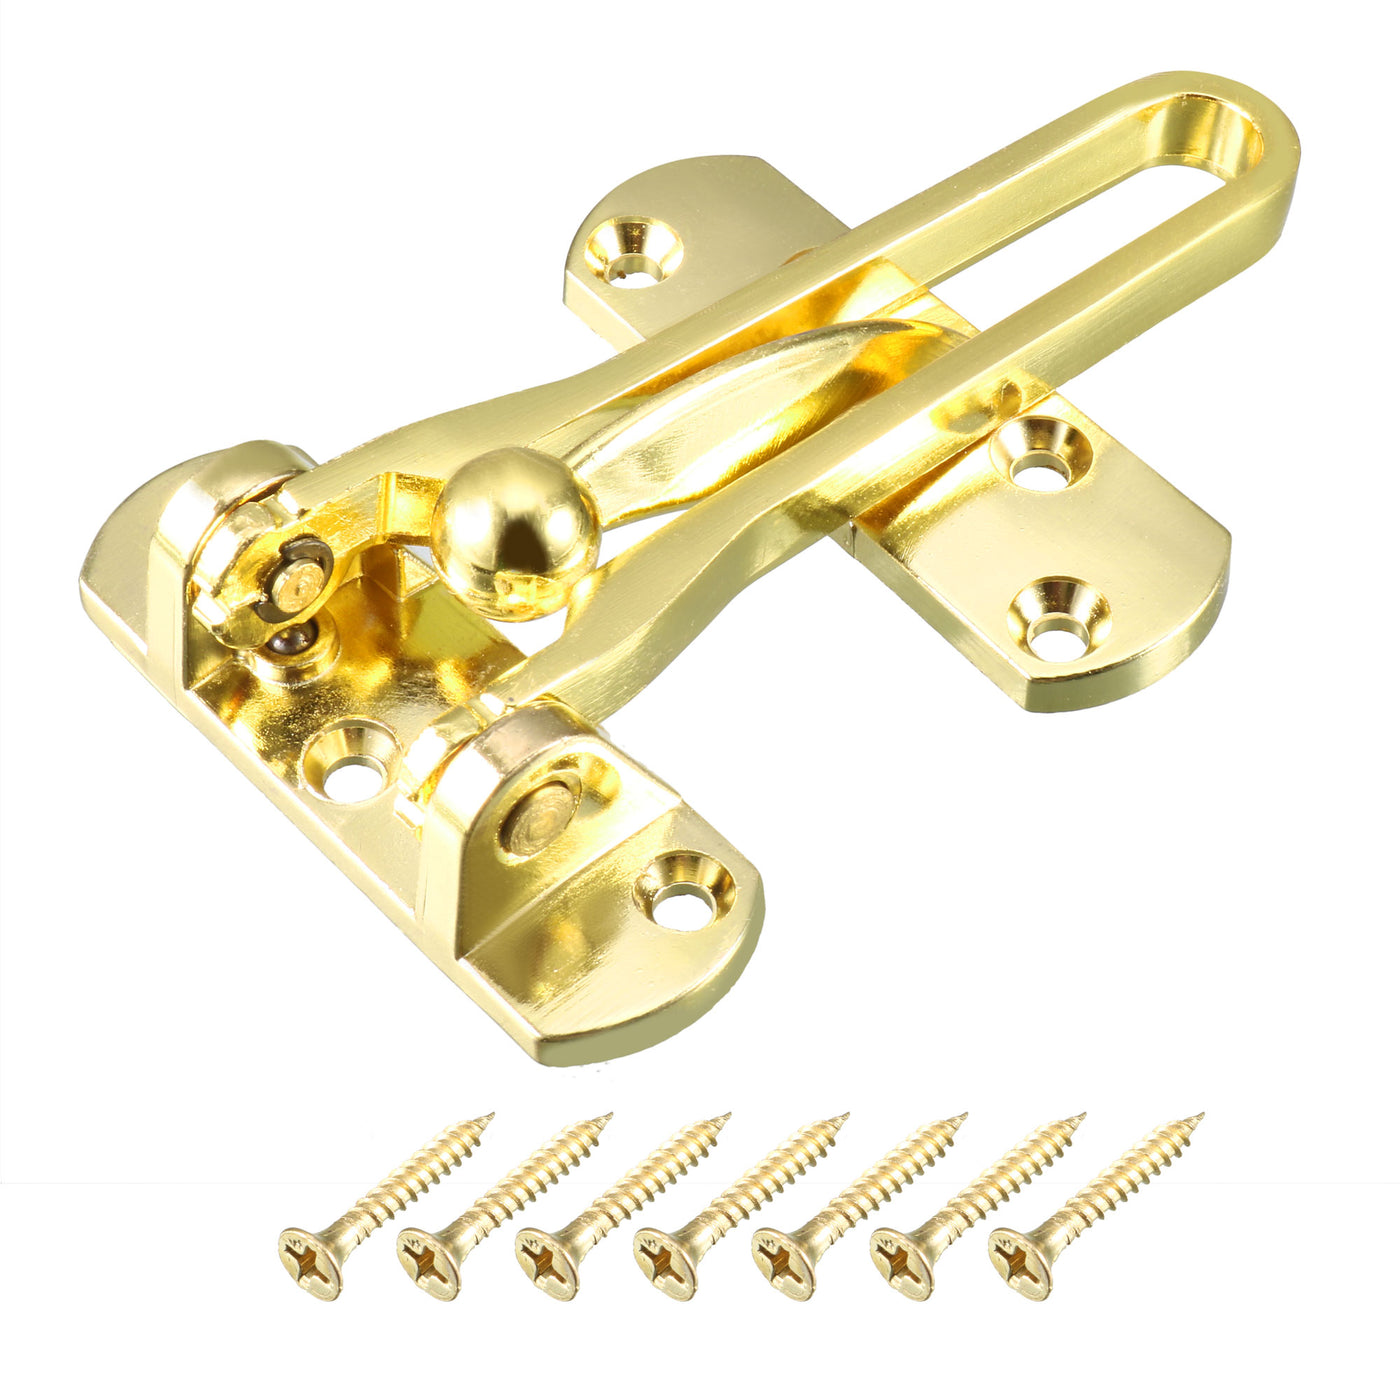 uxcell Uxcell Household Door Restrictor Lock Catch Metal Safety Security Chain Latch Gold Tone